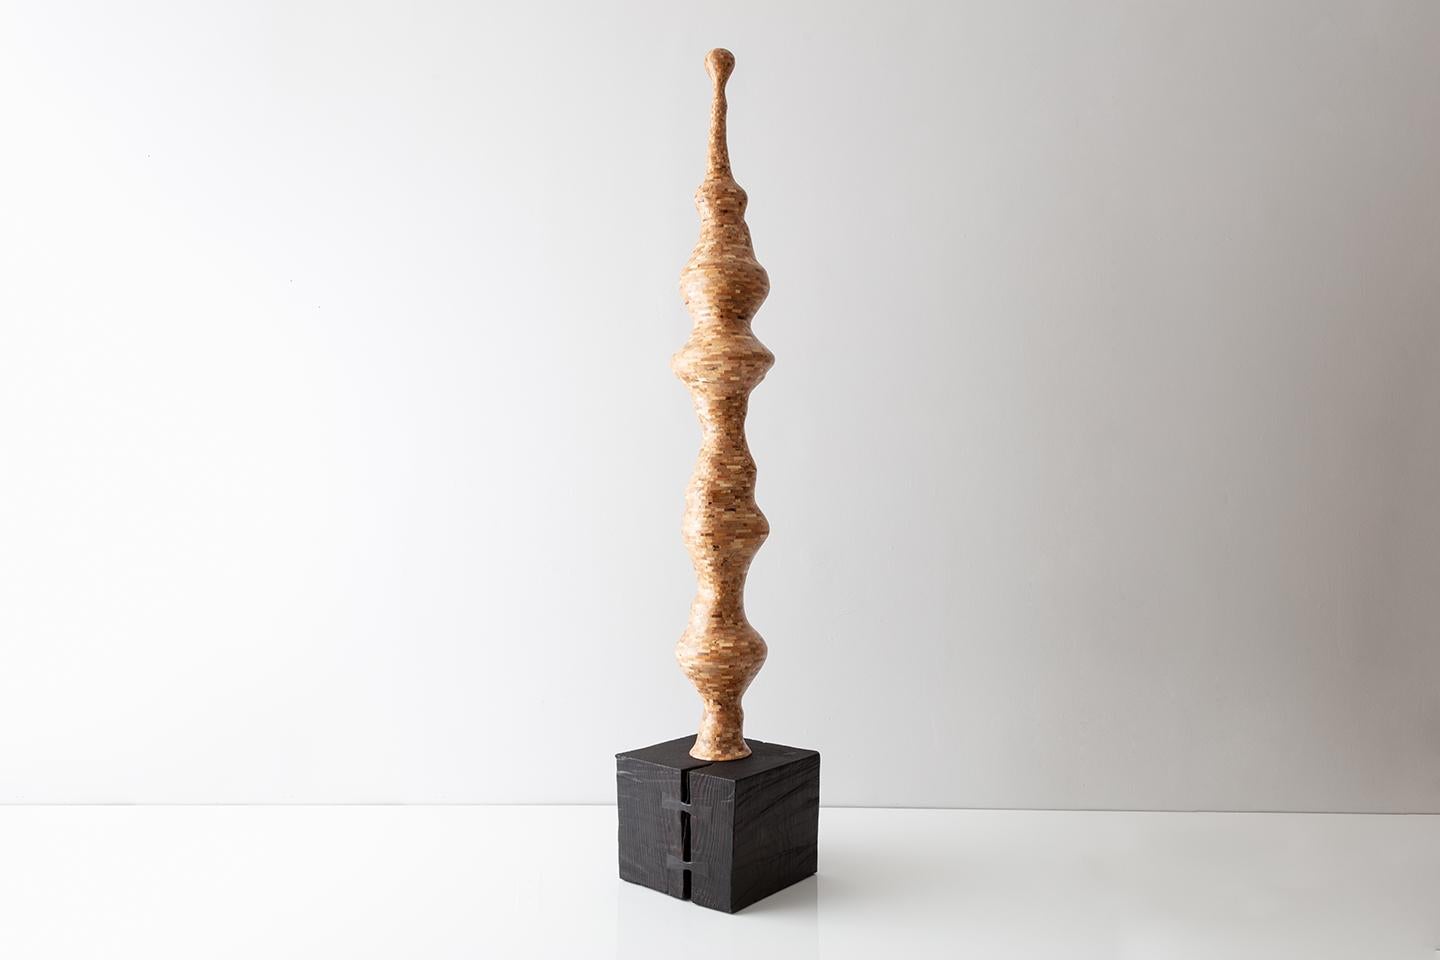 While this STACKED Totem is playful and slightly surreal, it makes quite a statement in any room. The climbing tower of salvaged Spalted Maple consists of approximately 6500 pieces individually stacked into over 270 layers, standing at almost 7'.